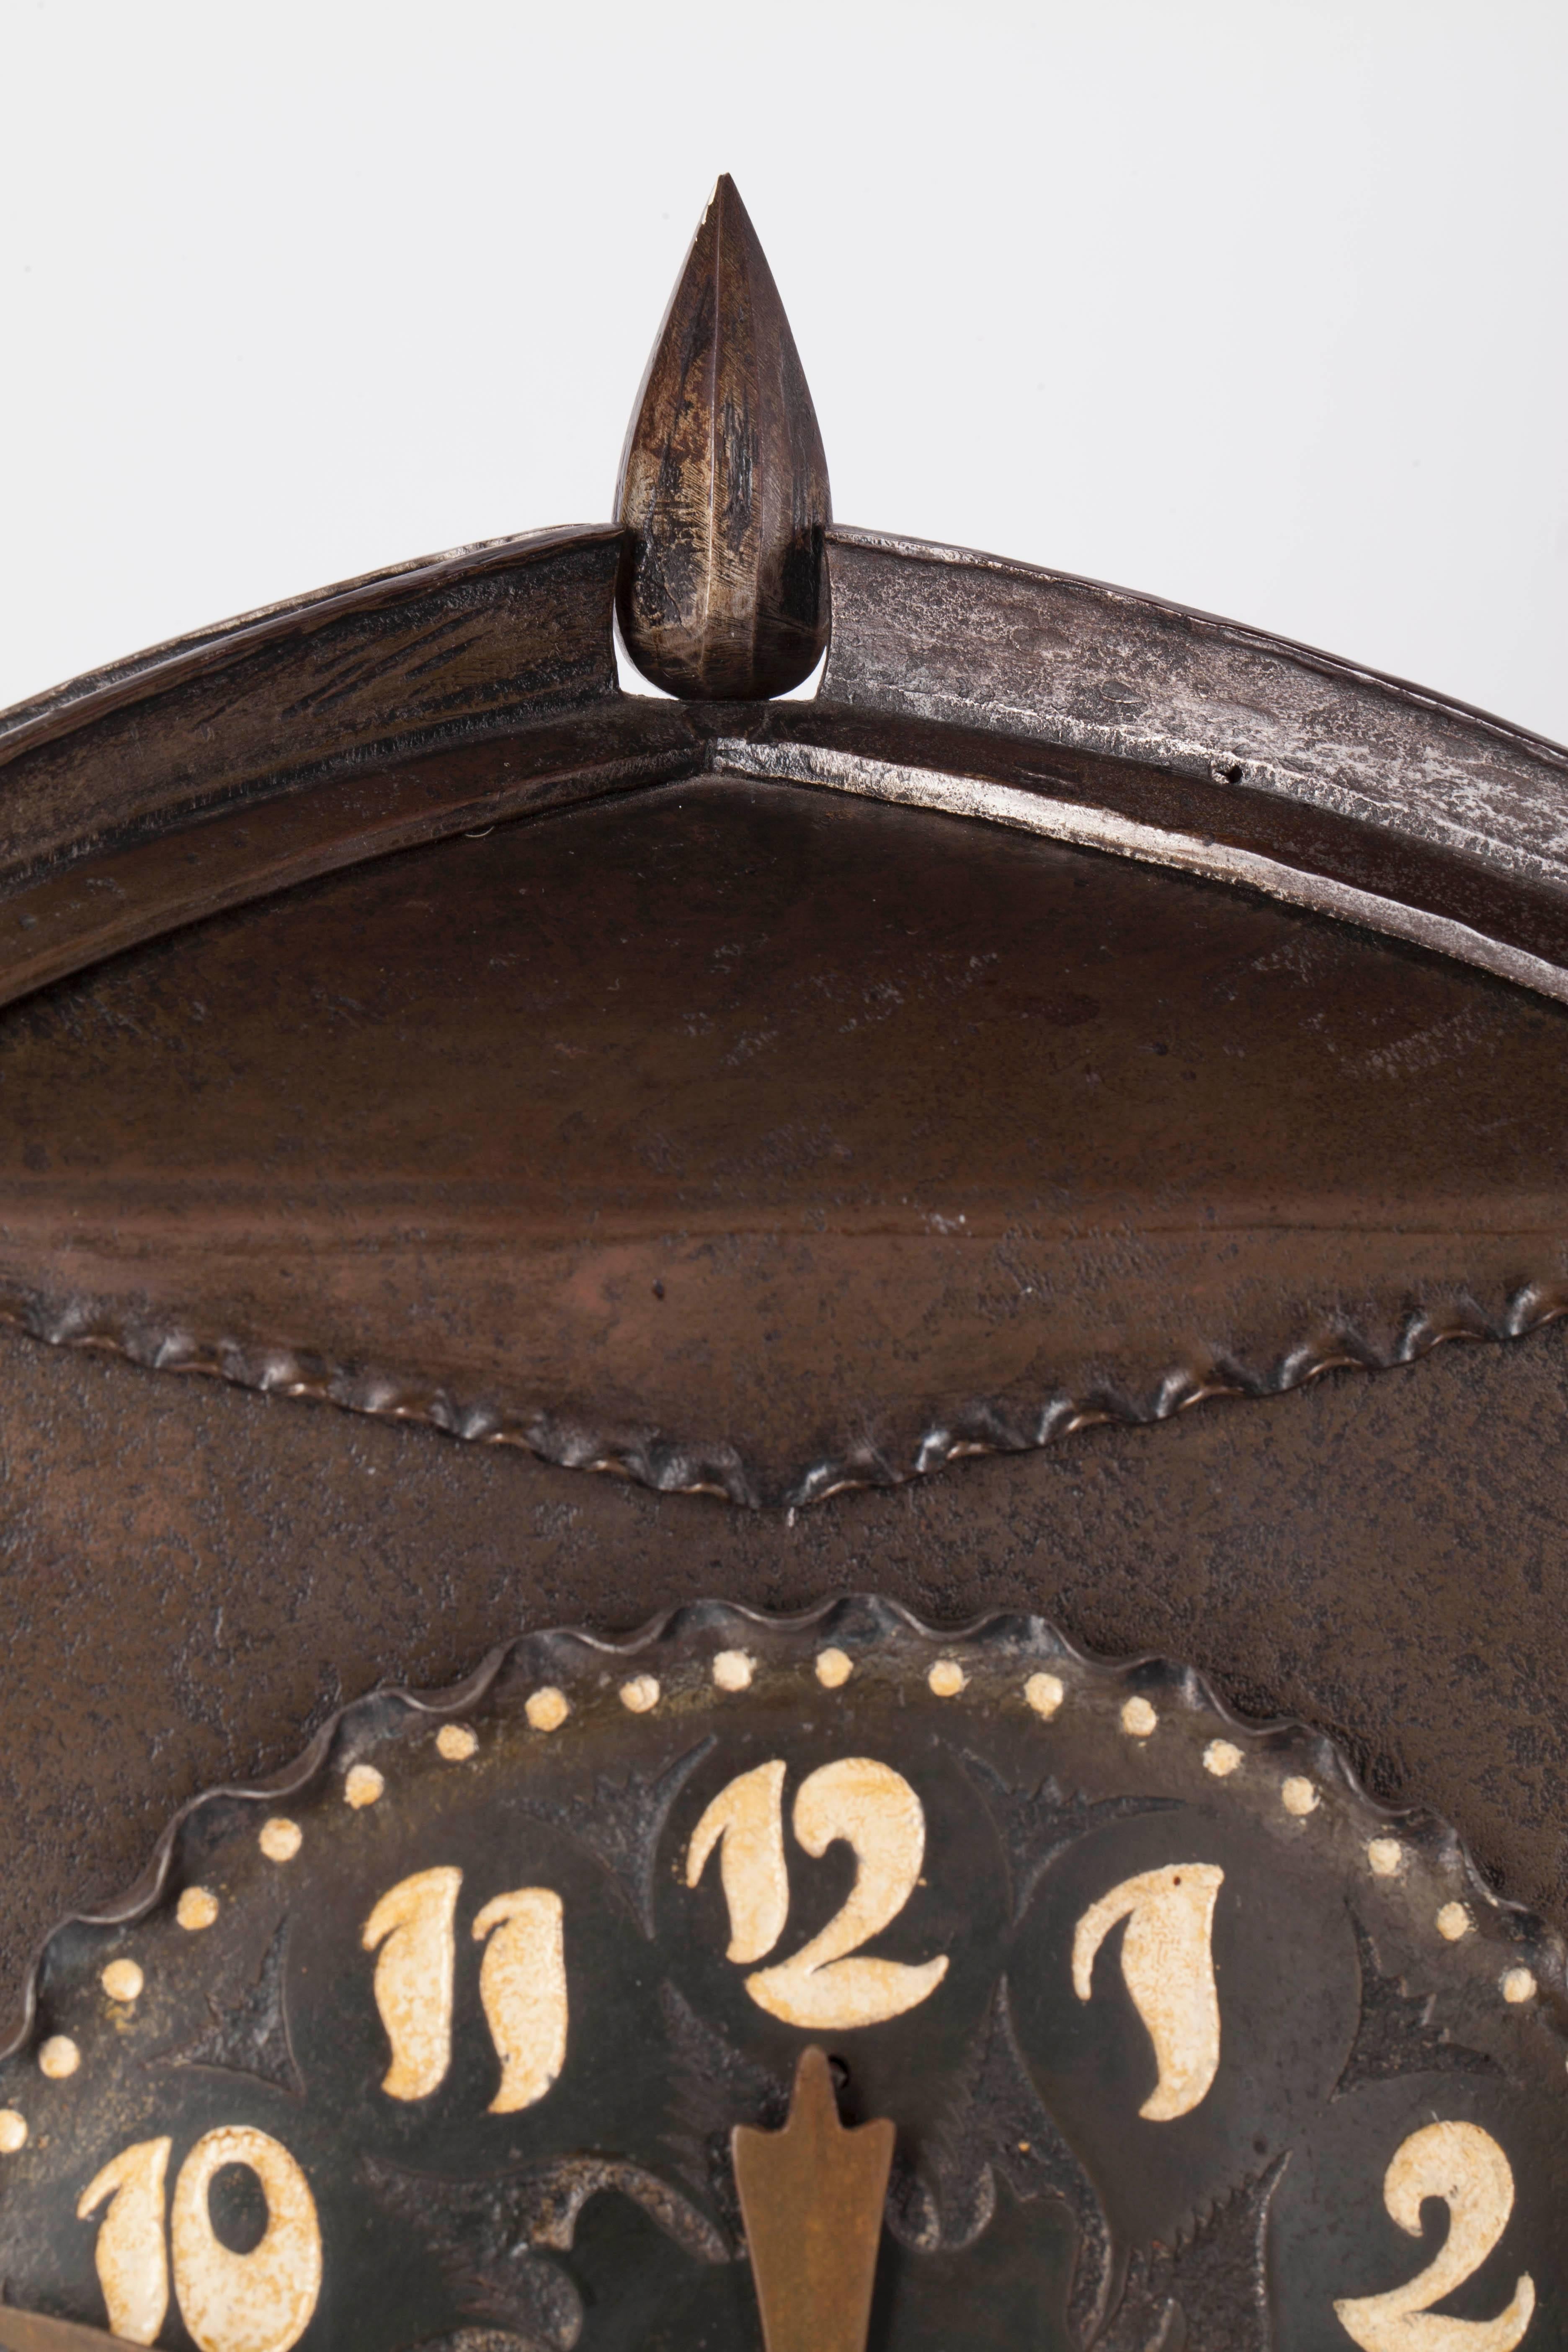 A beautiful wrought iron three-part clock set from the period of the Amsterdam School, circa 1920. The timepiece is running and checked, the hands are original from the Amsterdam school period, but not original to this clock. The electrical